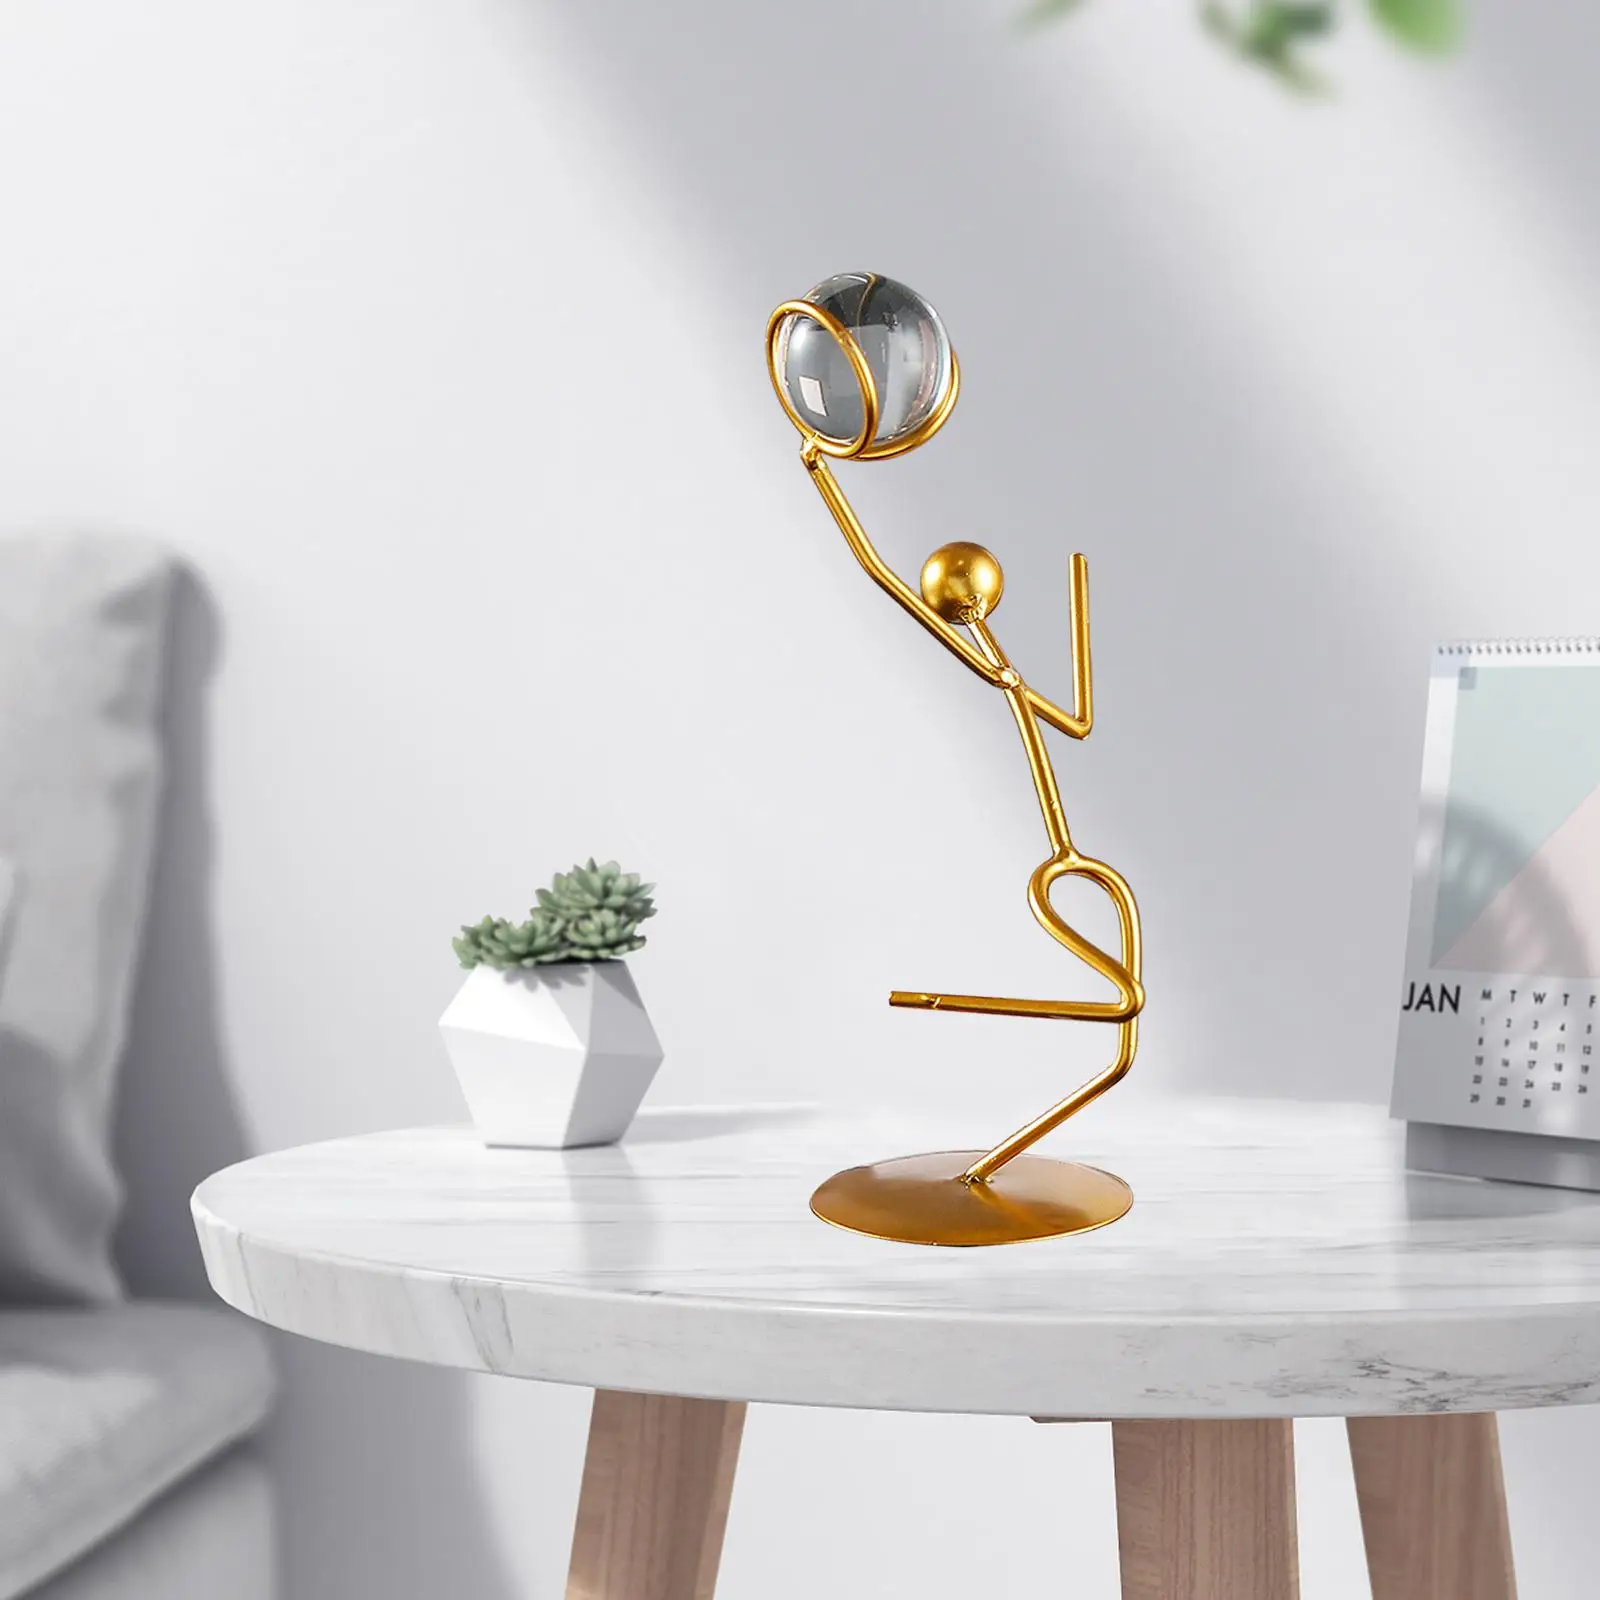 Crystal Ball Figurines with Metal Stand Minimalist Golden Ornaments for Home Bedroom Porch Photography Props Decoration